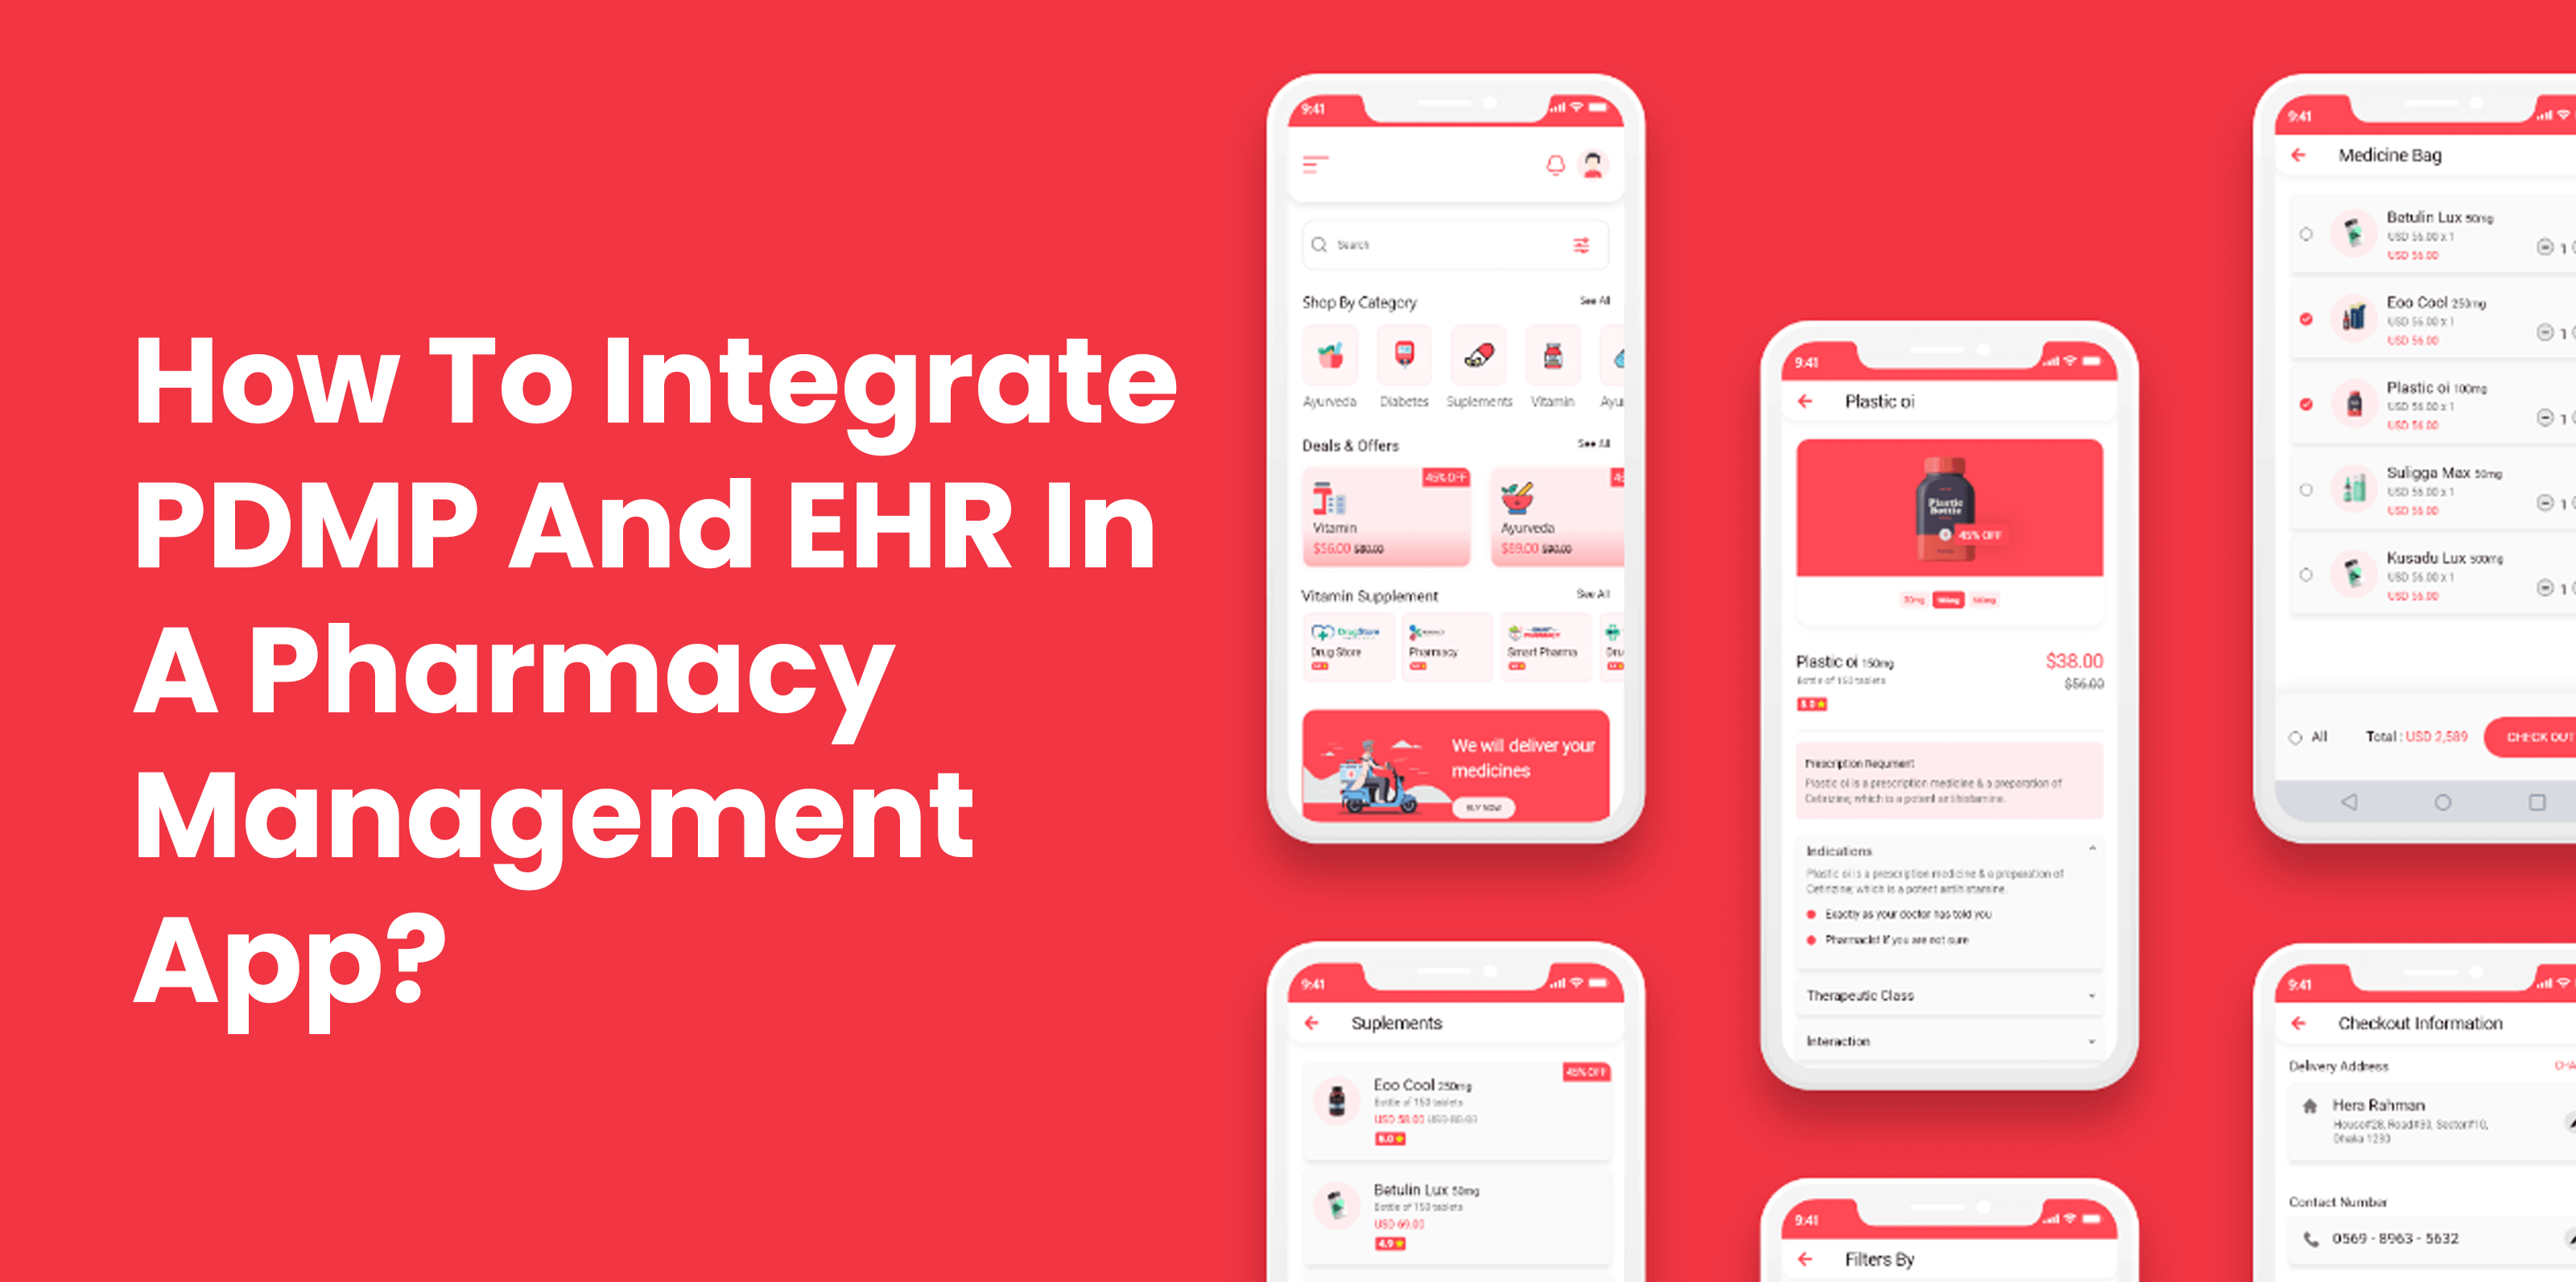 How-To-Integrate-PDMP-And-EHR-In-A-Pharmacy-Management-App